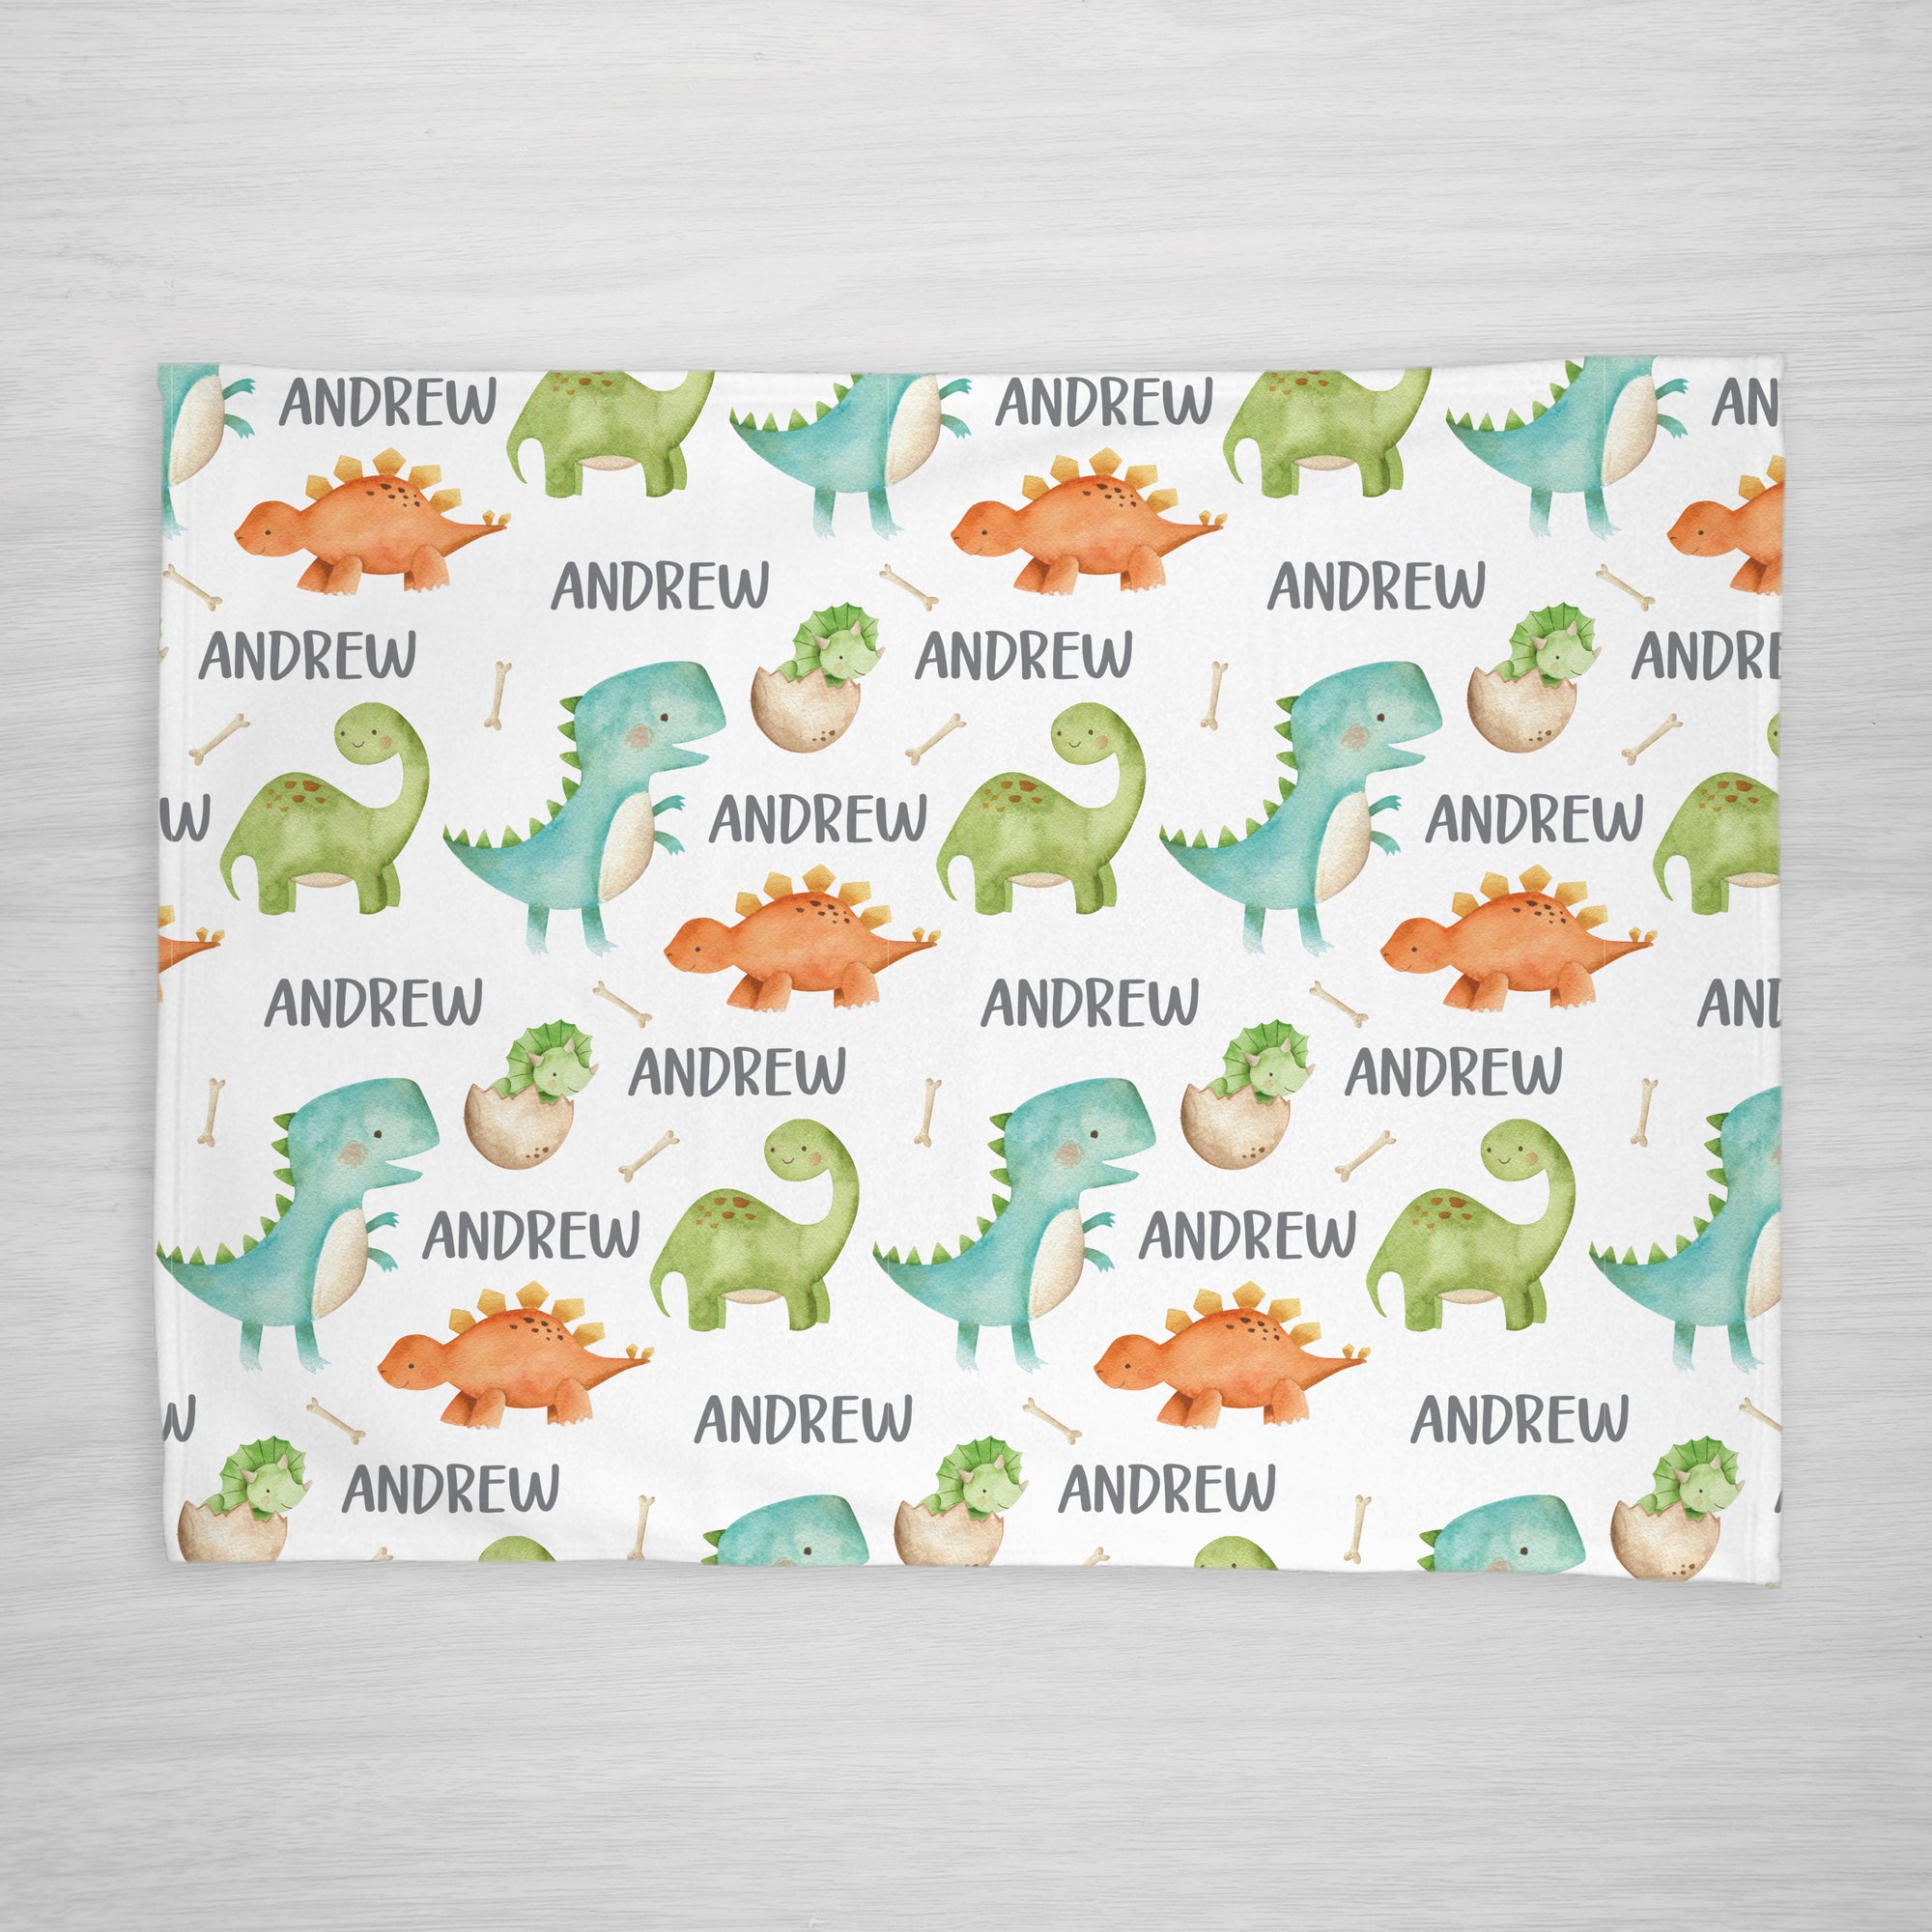 Dinosaur Personalized Name Blanket from Pipsy.com